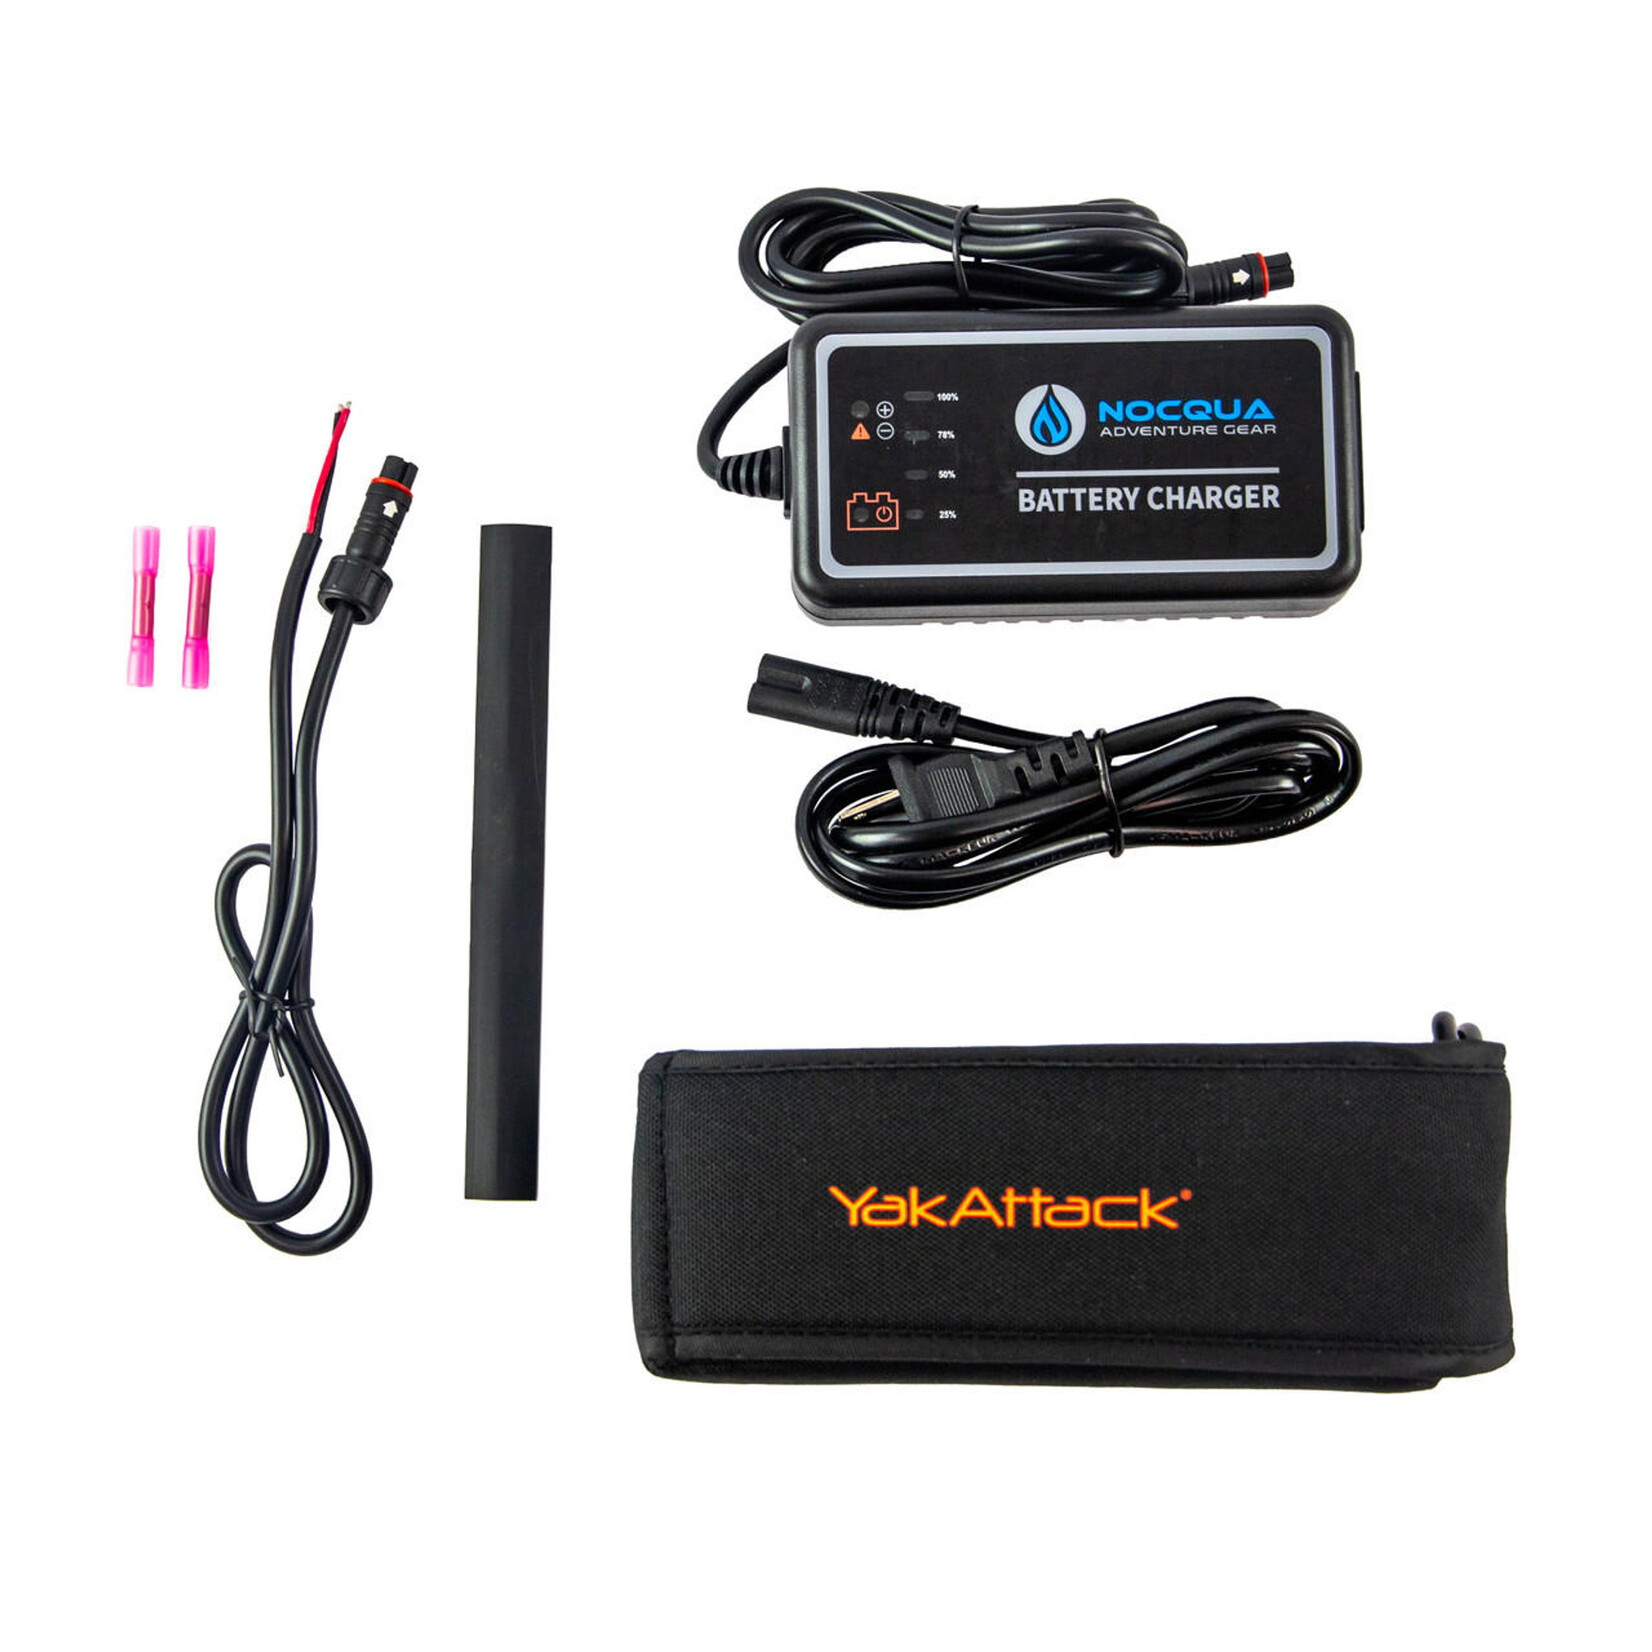 Yakattack Nocqua 20Ah Lithium-Ion Battery Power Kit with Charger